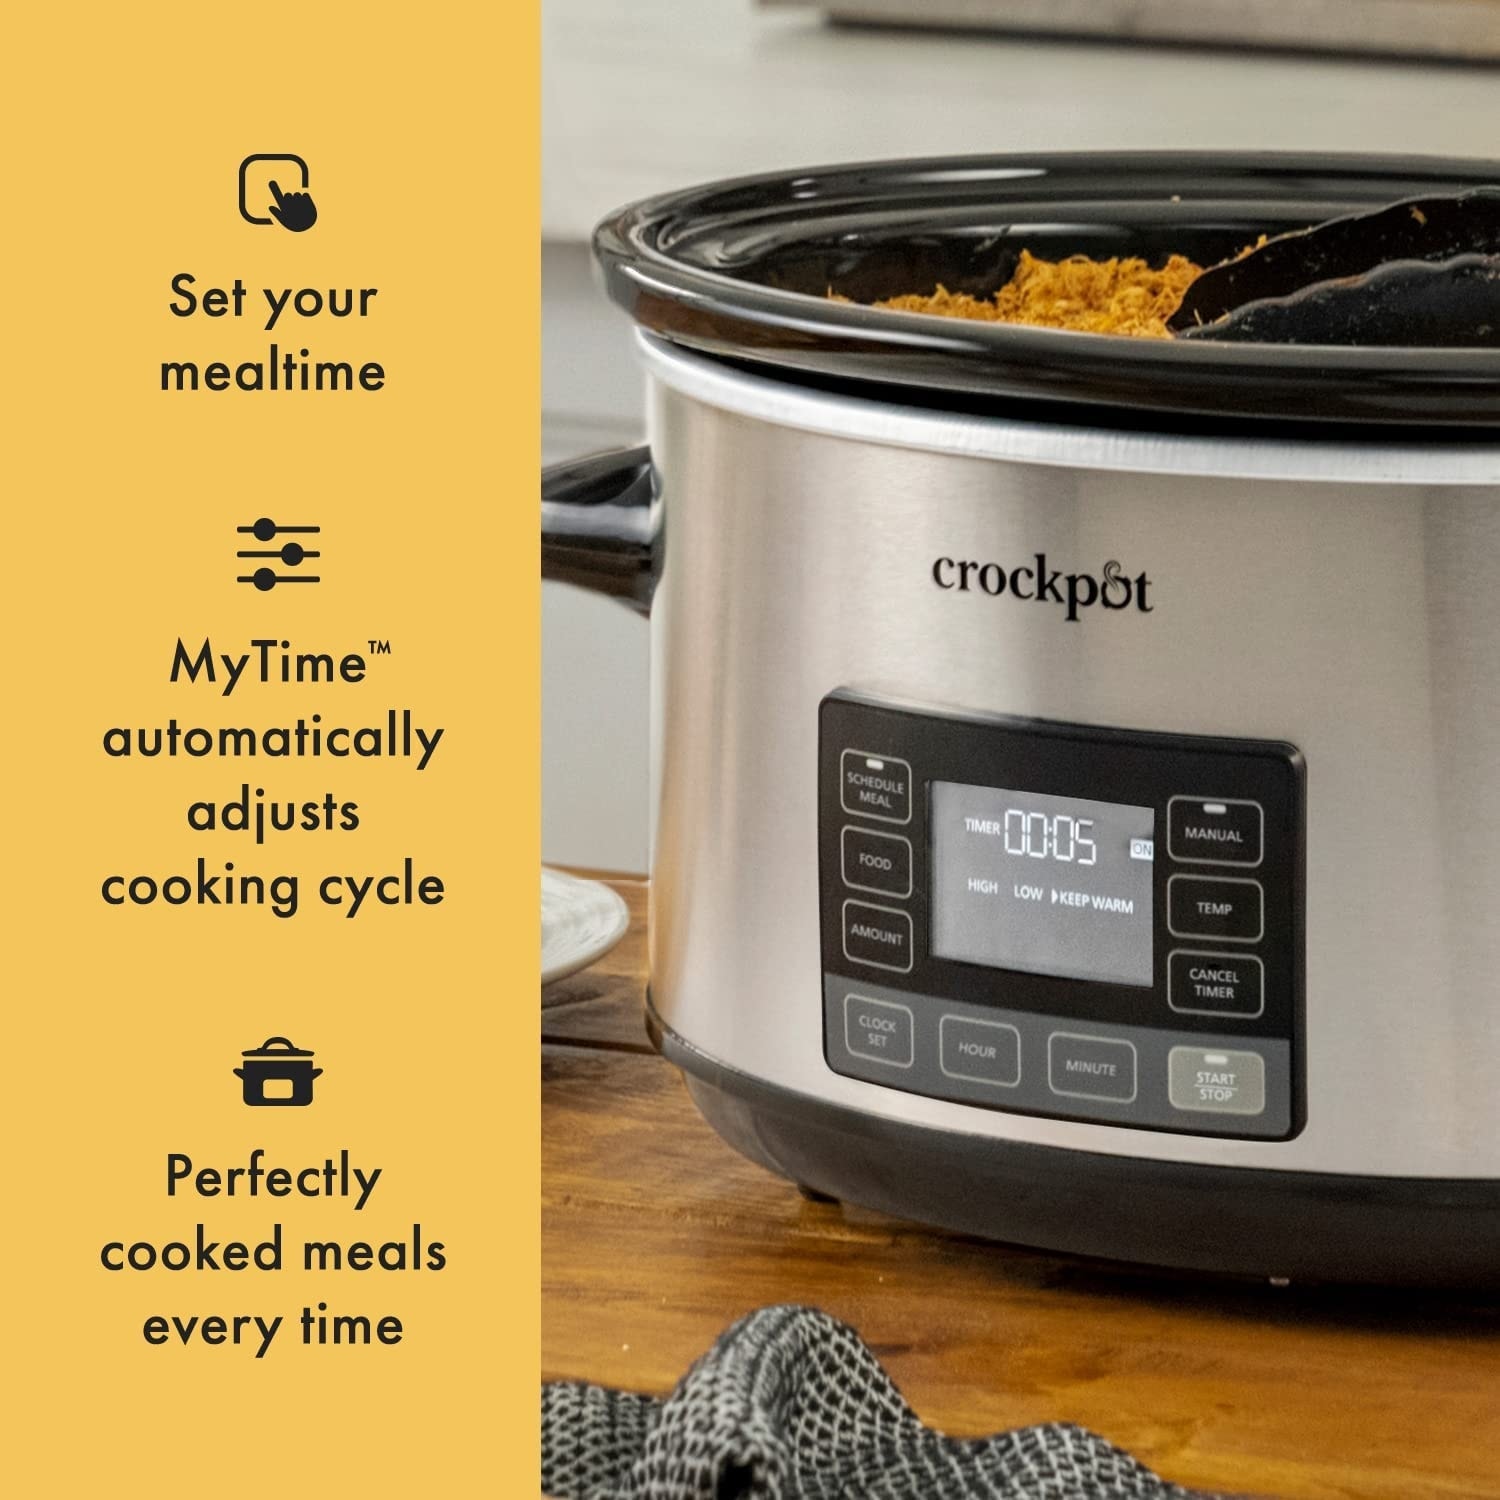 https://ak1.ostkcdn.com/images/products/is/images/direct/7e6a0c07173938bf8ca4a00f87ded633f4f07161/Portable-7-Quart-Slow-Cooker-with-Locking-Lid-and-Auto-Adjust-Cook-Time-Technology%2C-Stainless-Steel.jpg